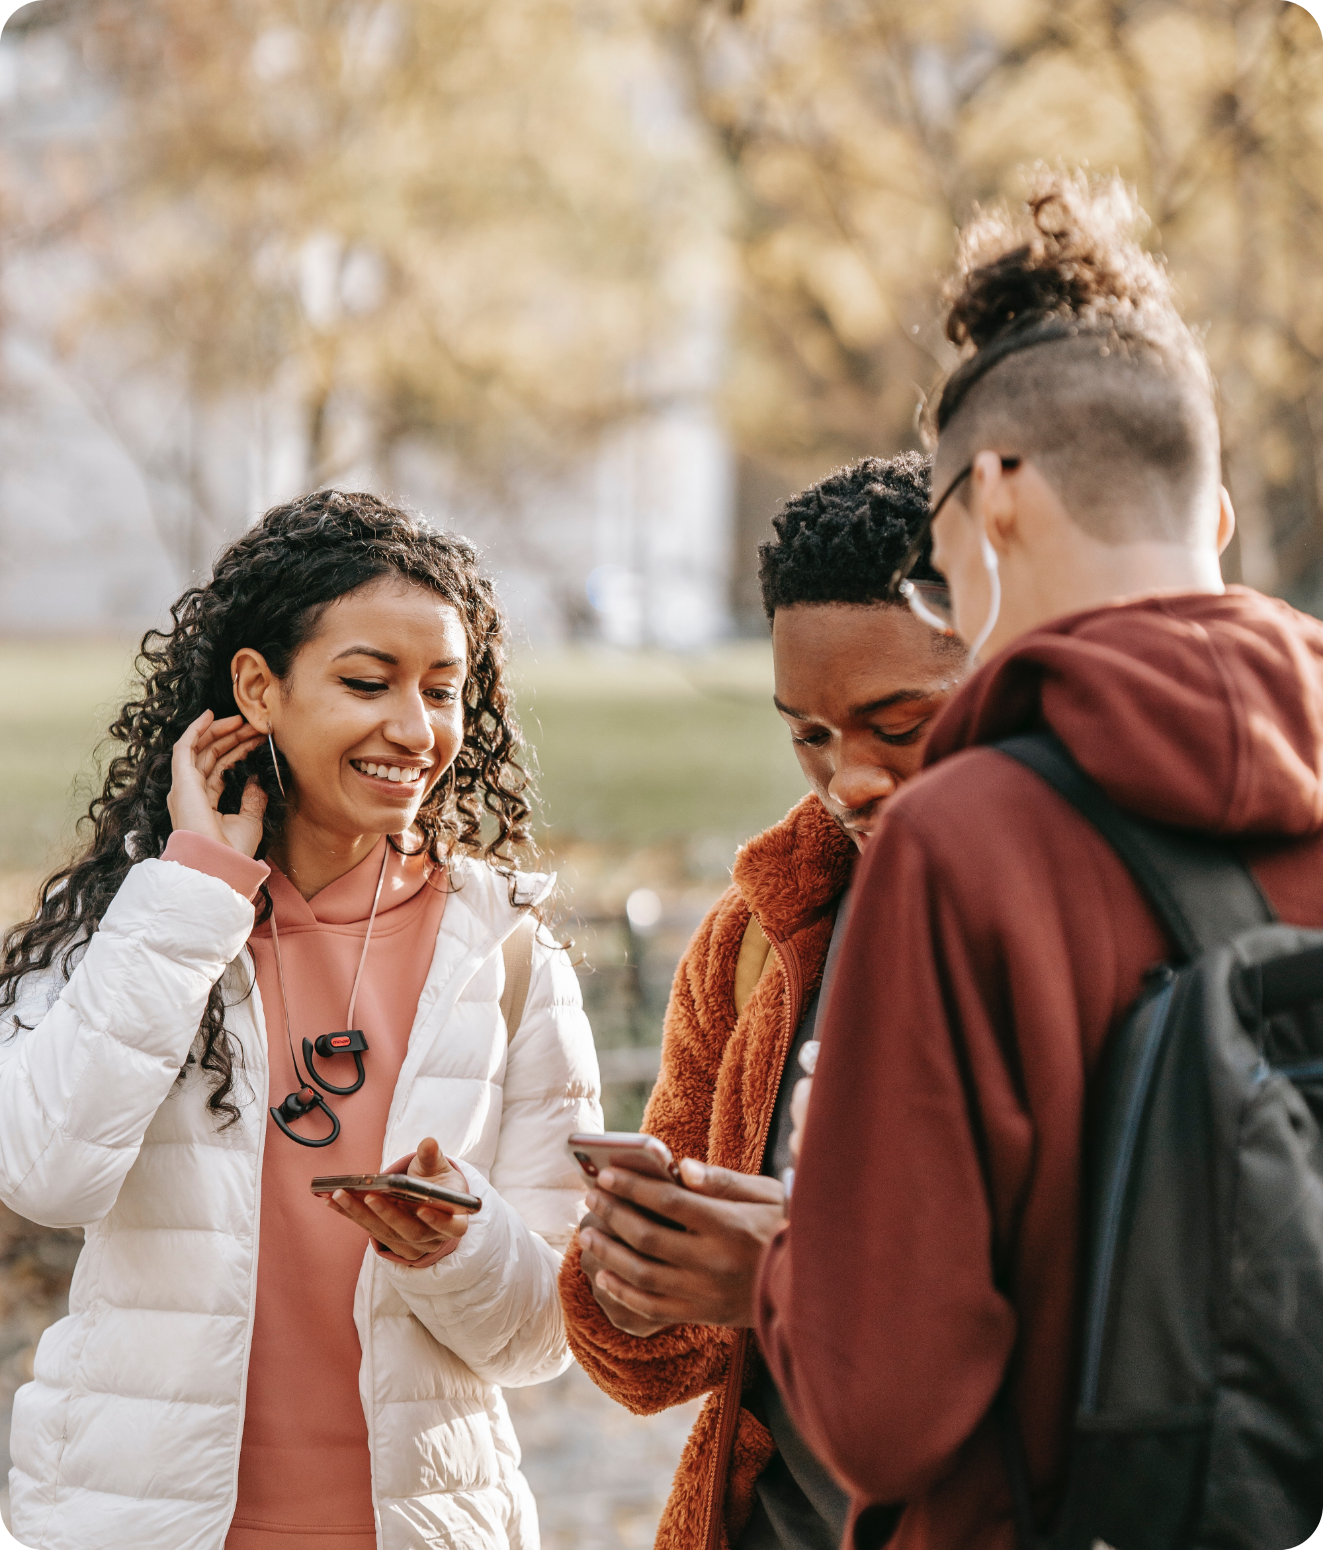 3 young people smiling and looking at their phones